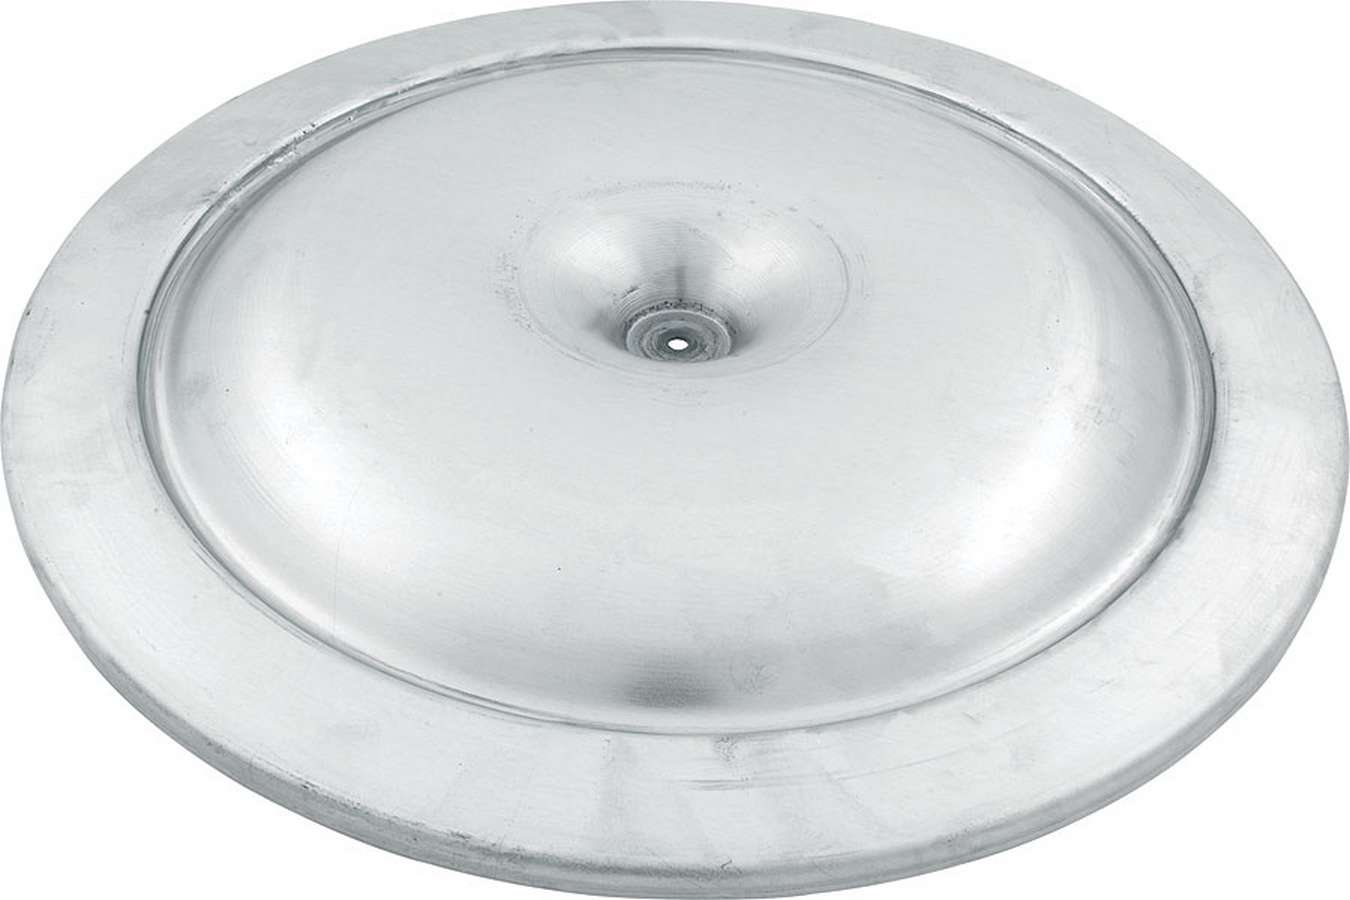 Allstar Performance 26091 Offset 14 in Round Air Cleaner Base